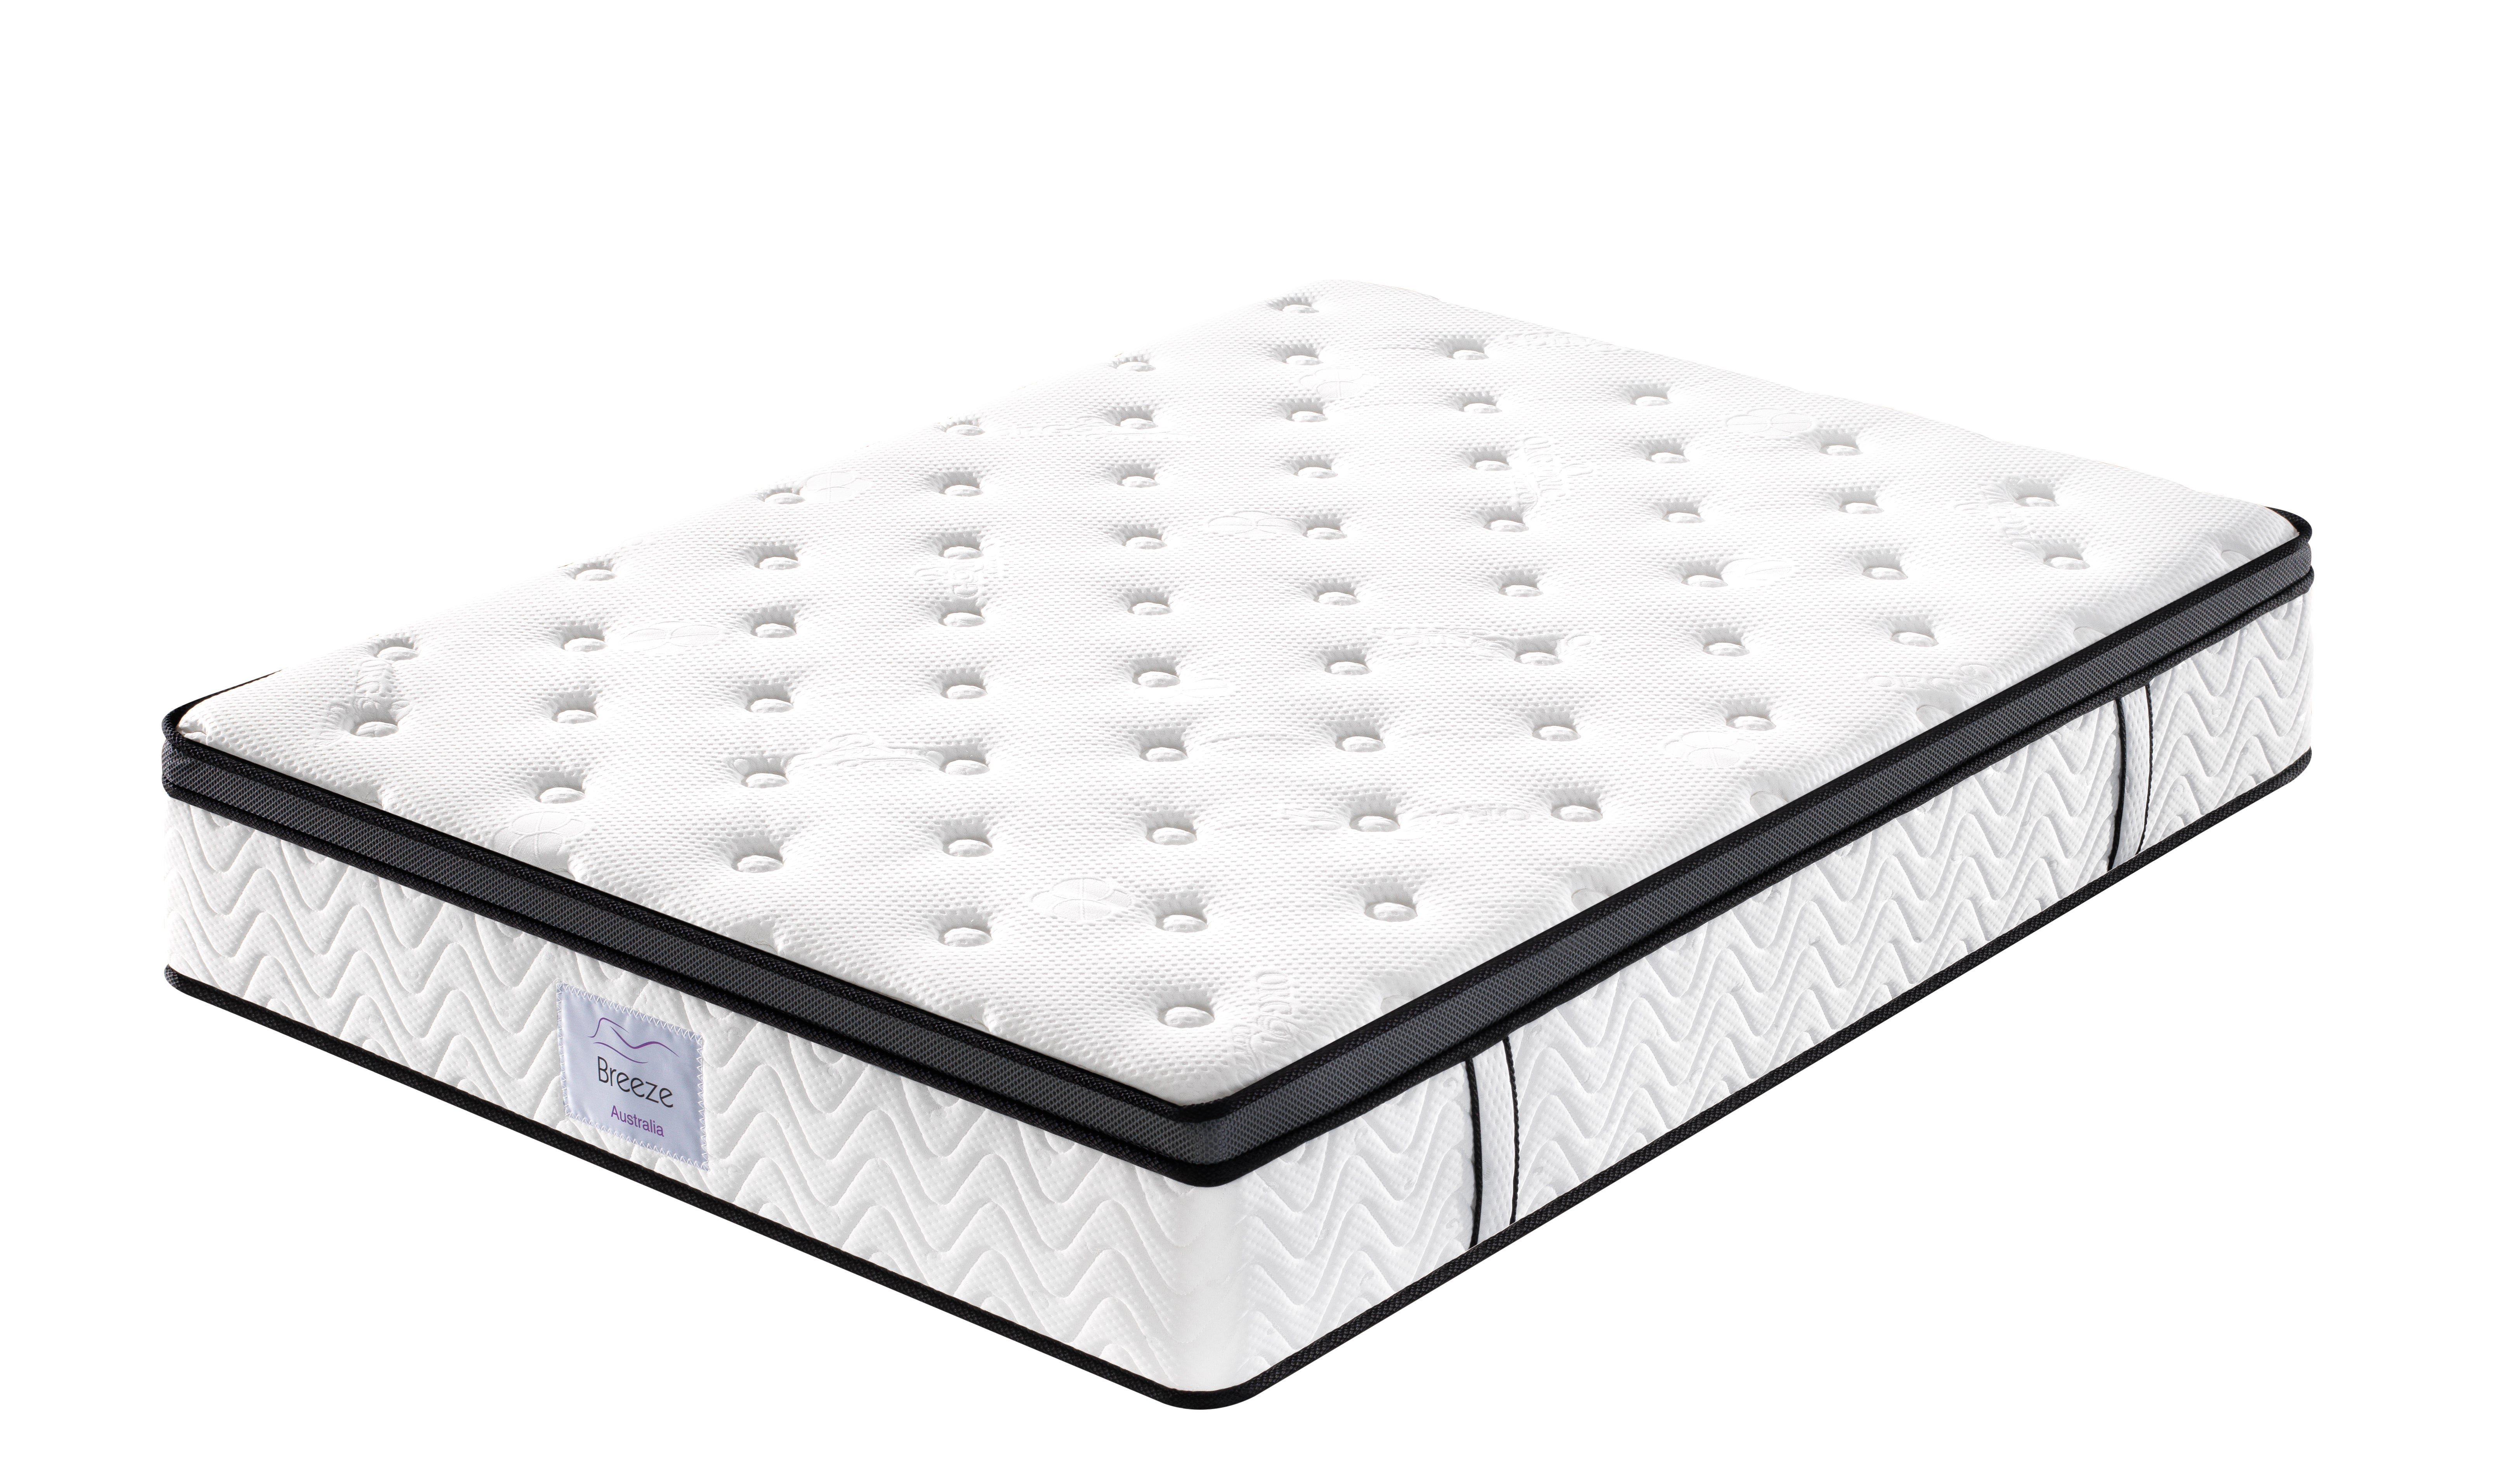 queen size mattress case for bed bugs